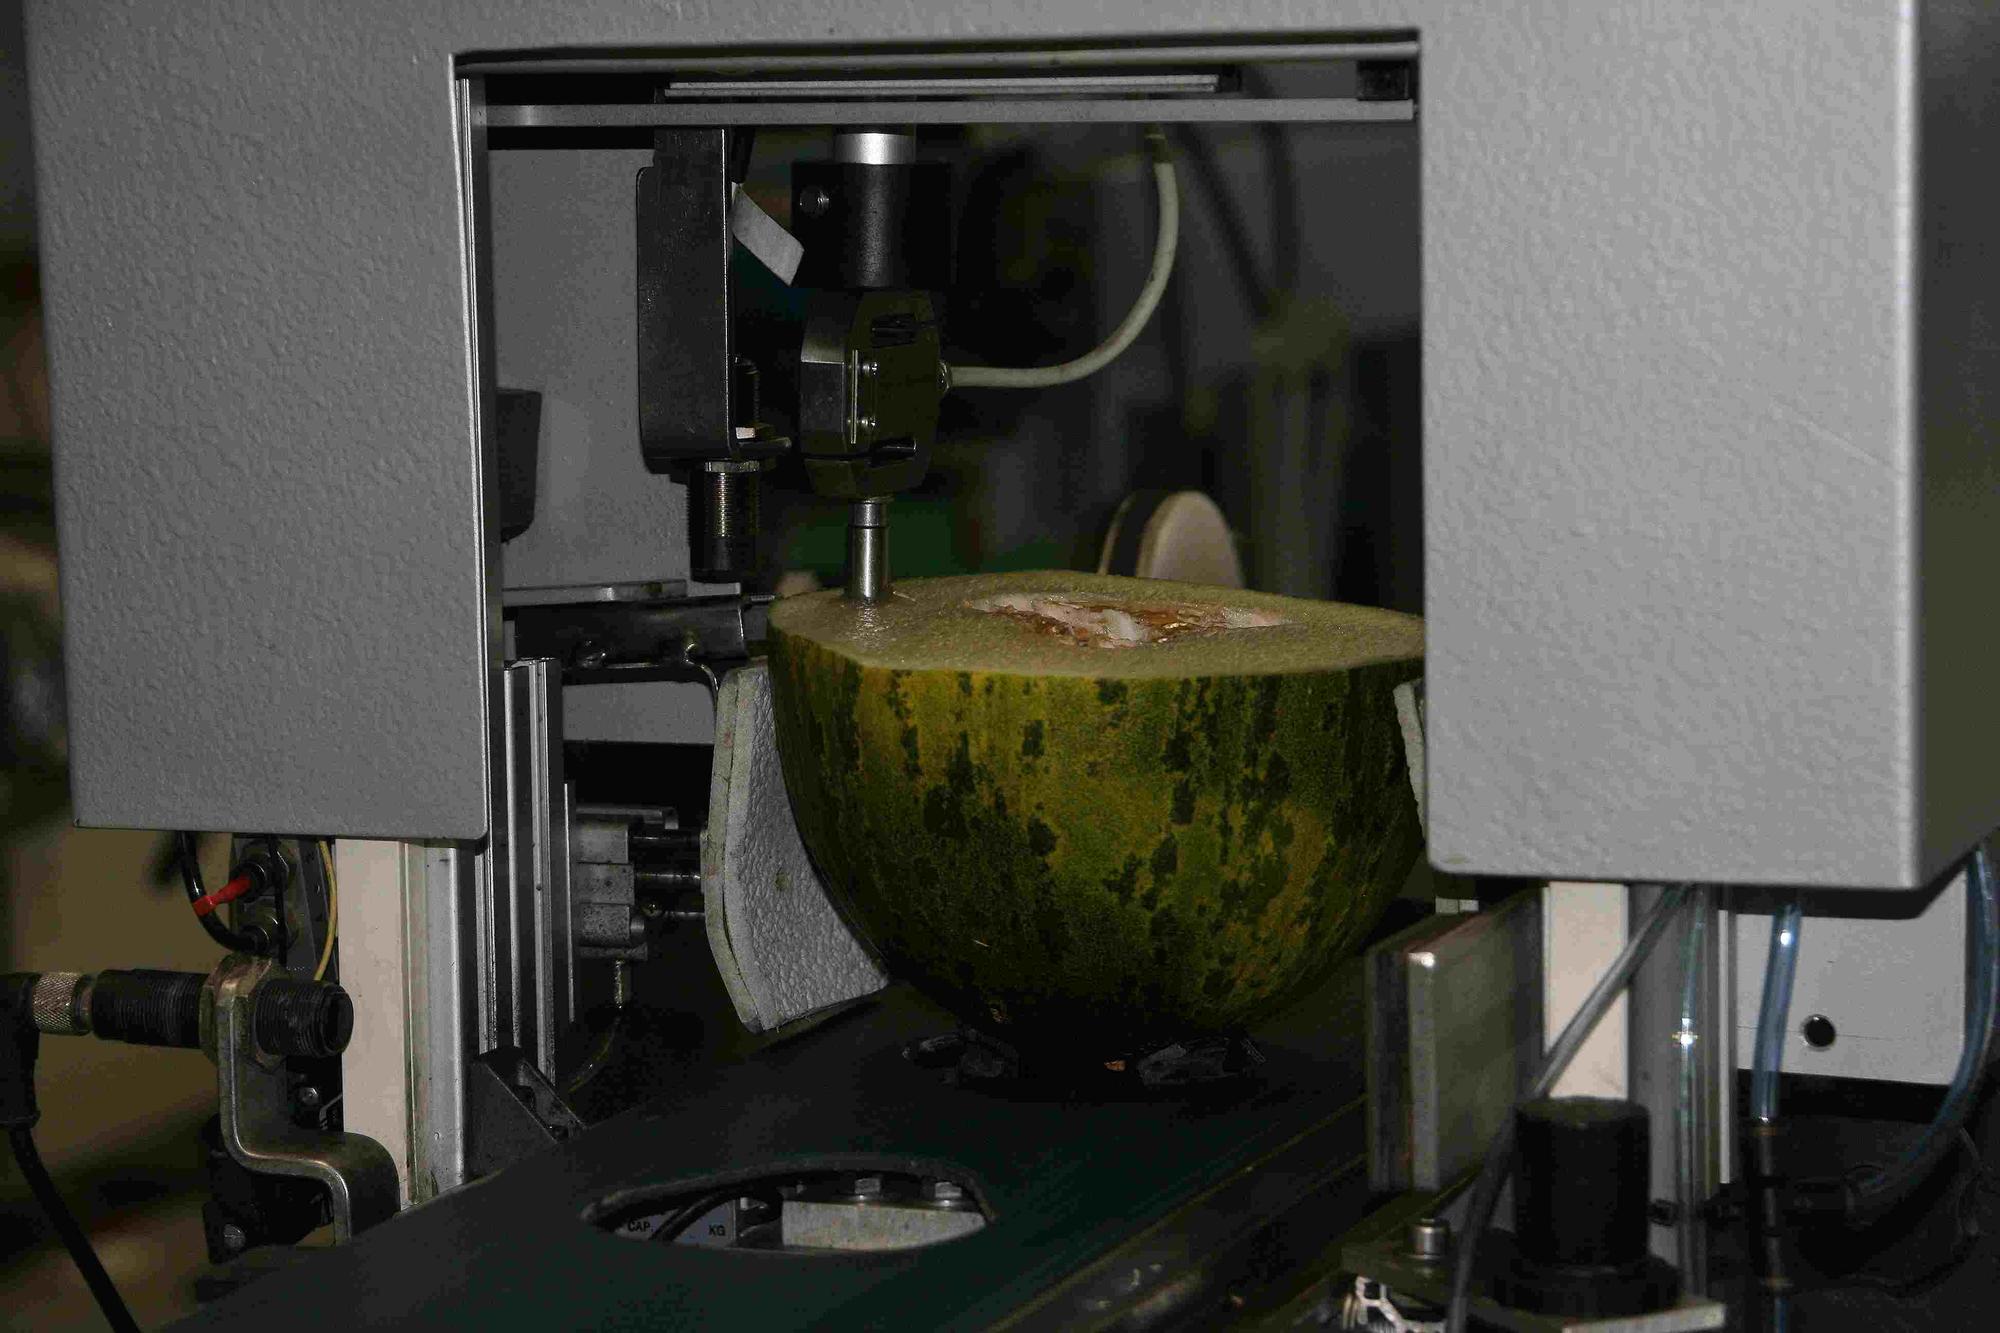 Measurement of the firmness of the flesh of melons